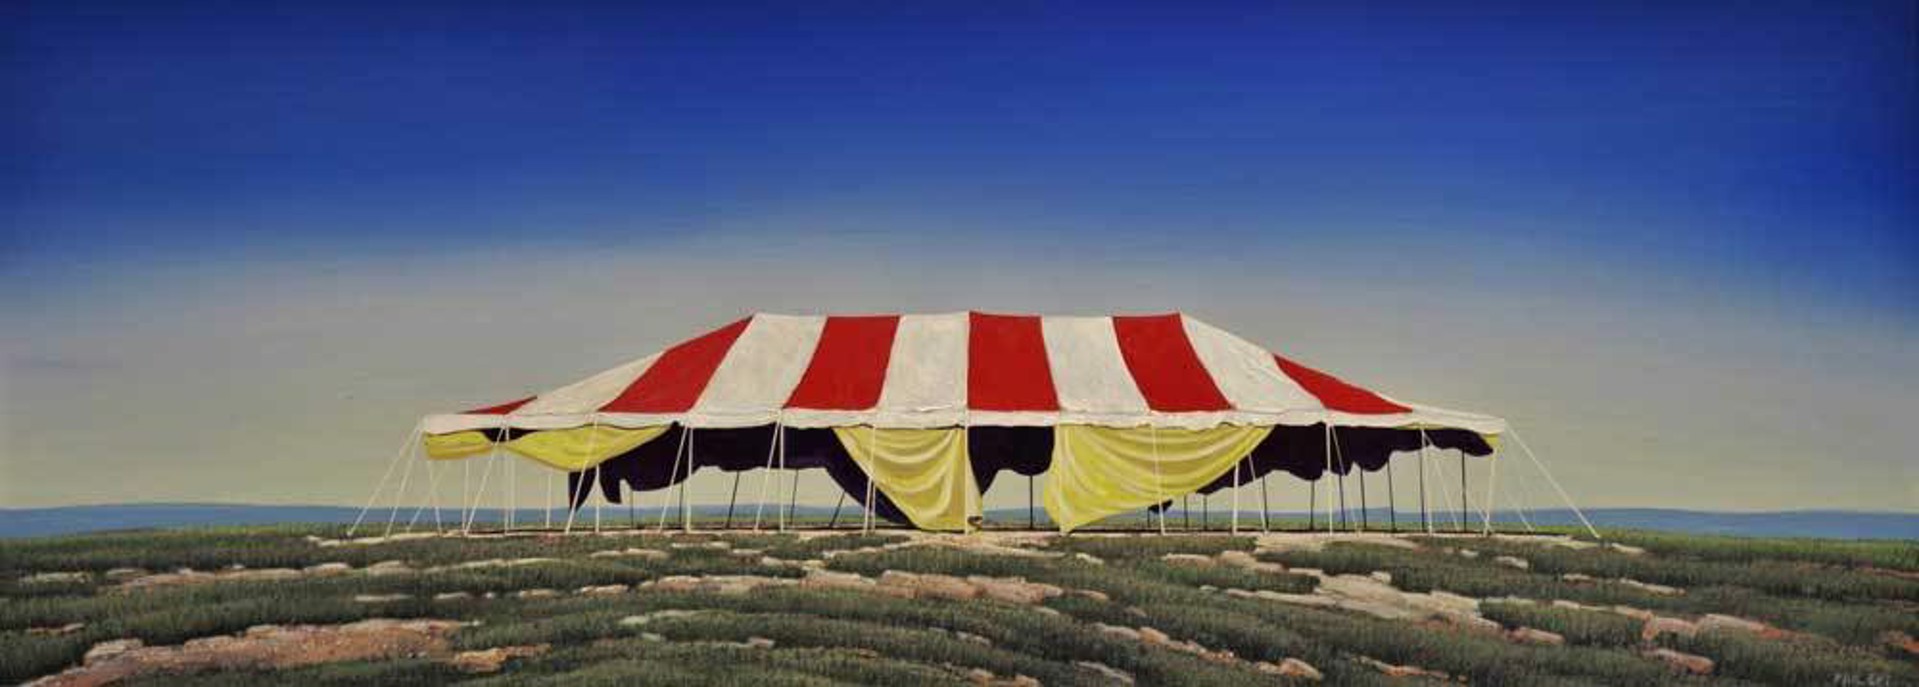 The Tent by Phil Epp